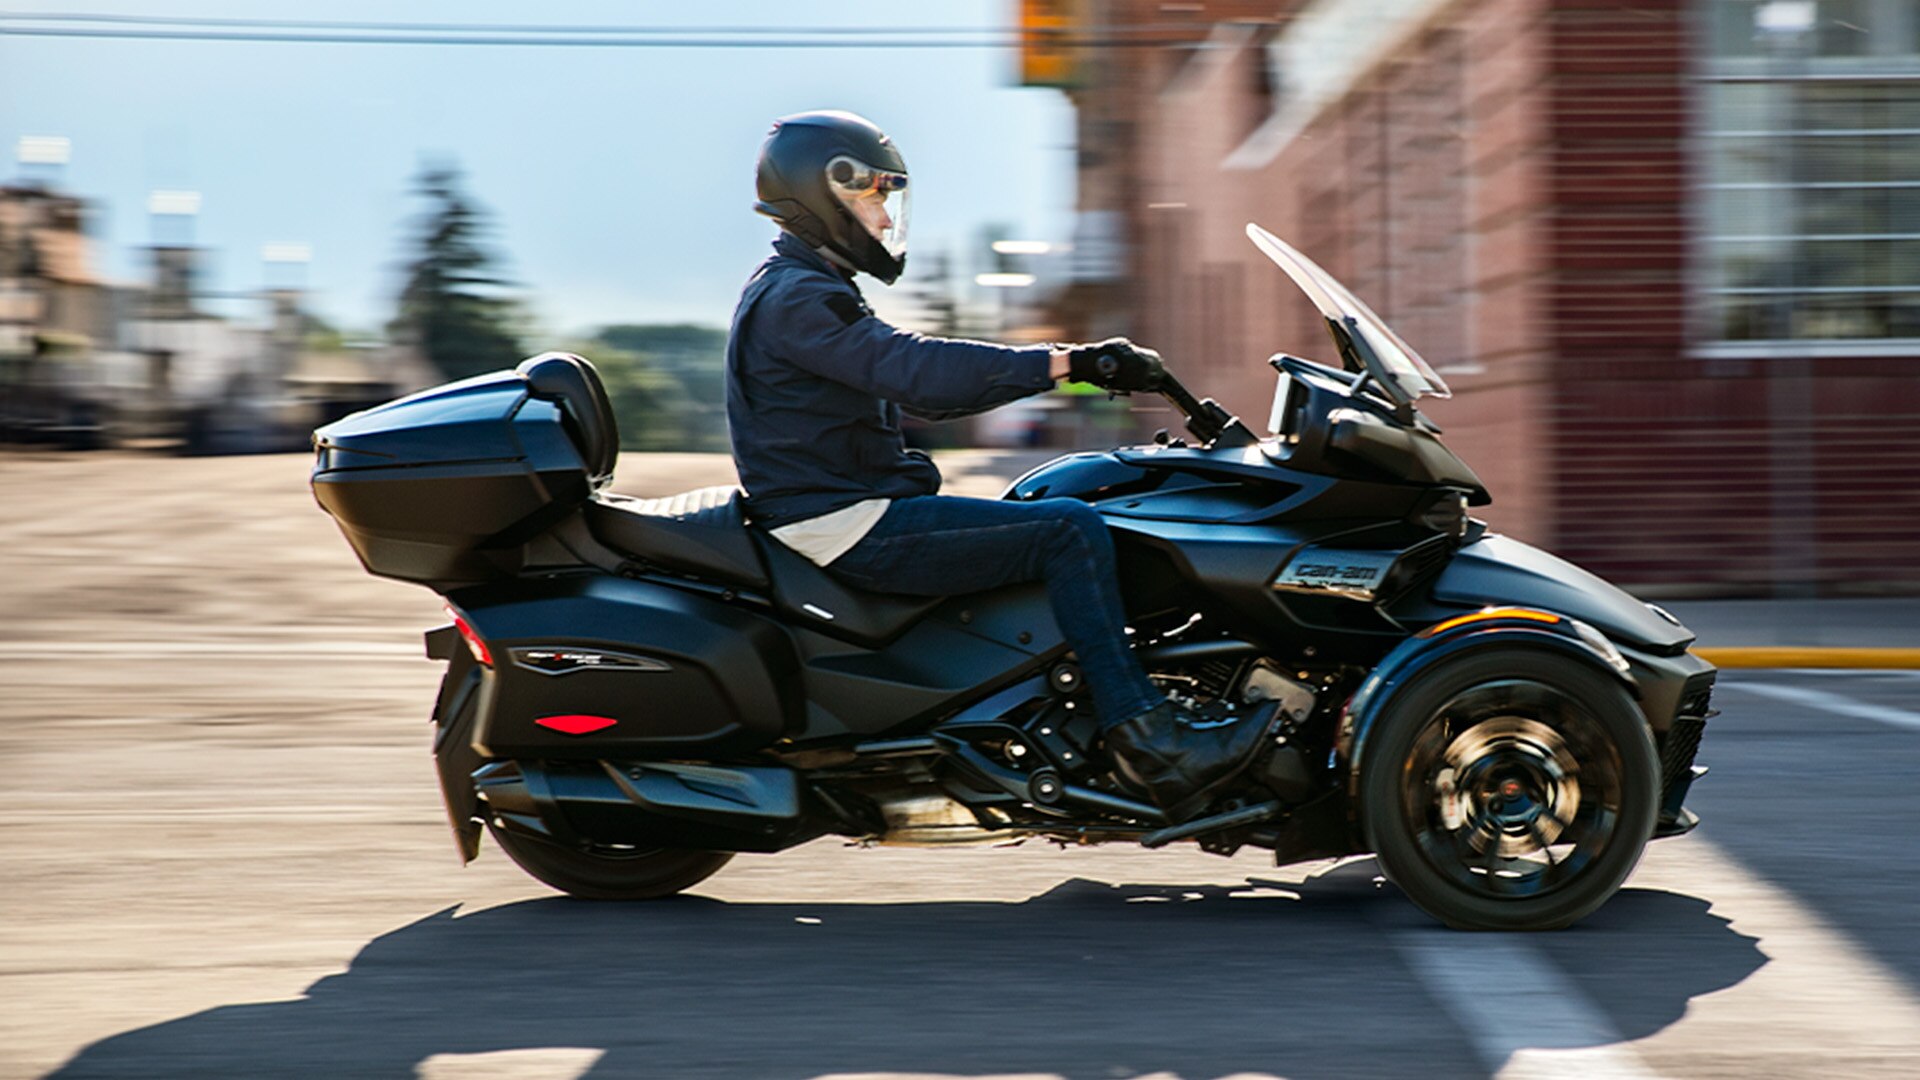 3-wheel Can-Am motorcycle equipped with a LinQ storage box riding through the city